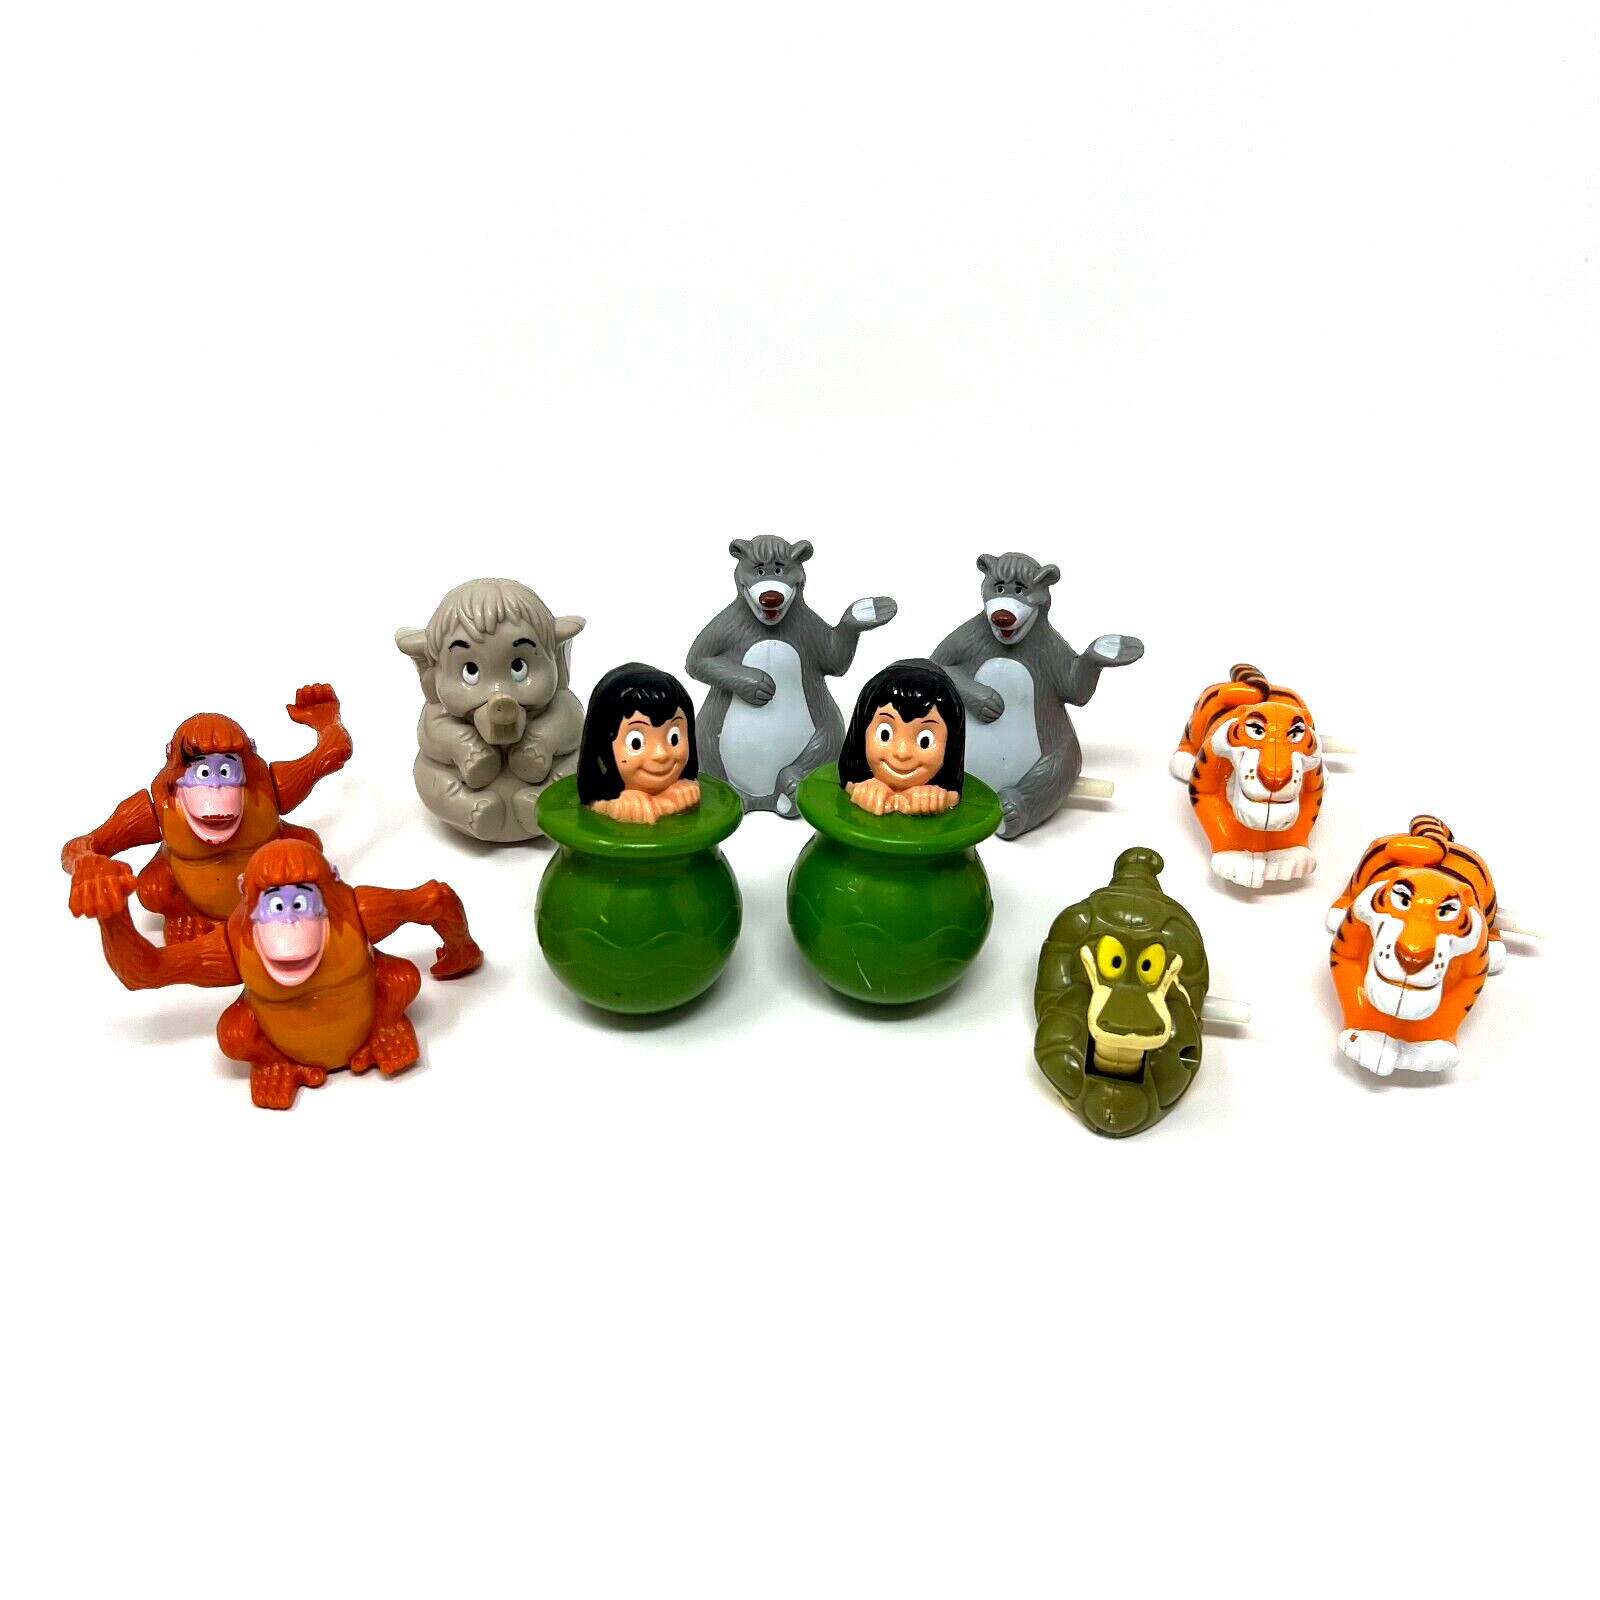 1989 McDonald’s The Jungle Book Happy Meal Windup Toys Lot of 10 Used